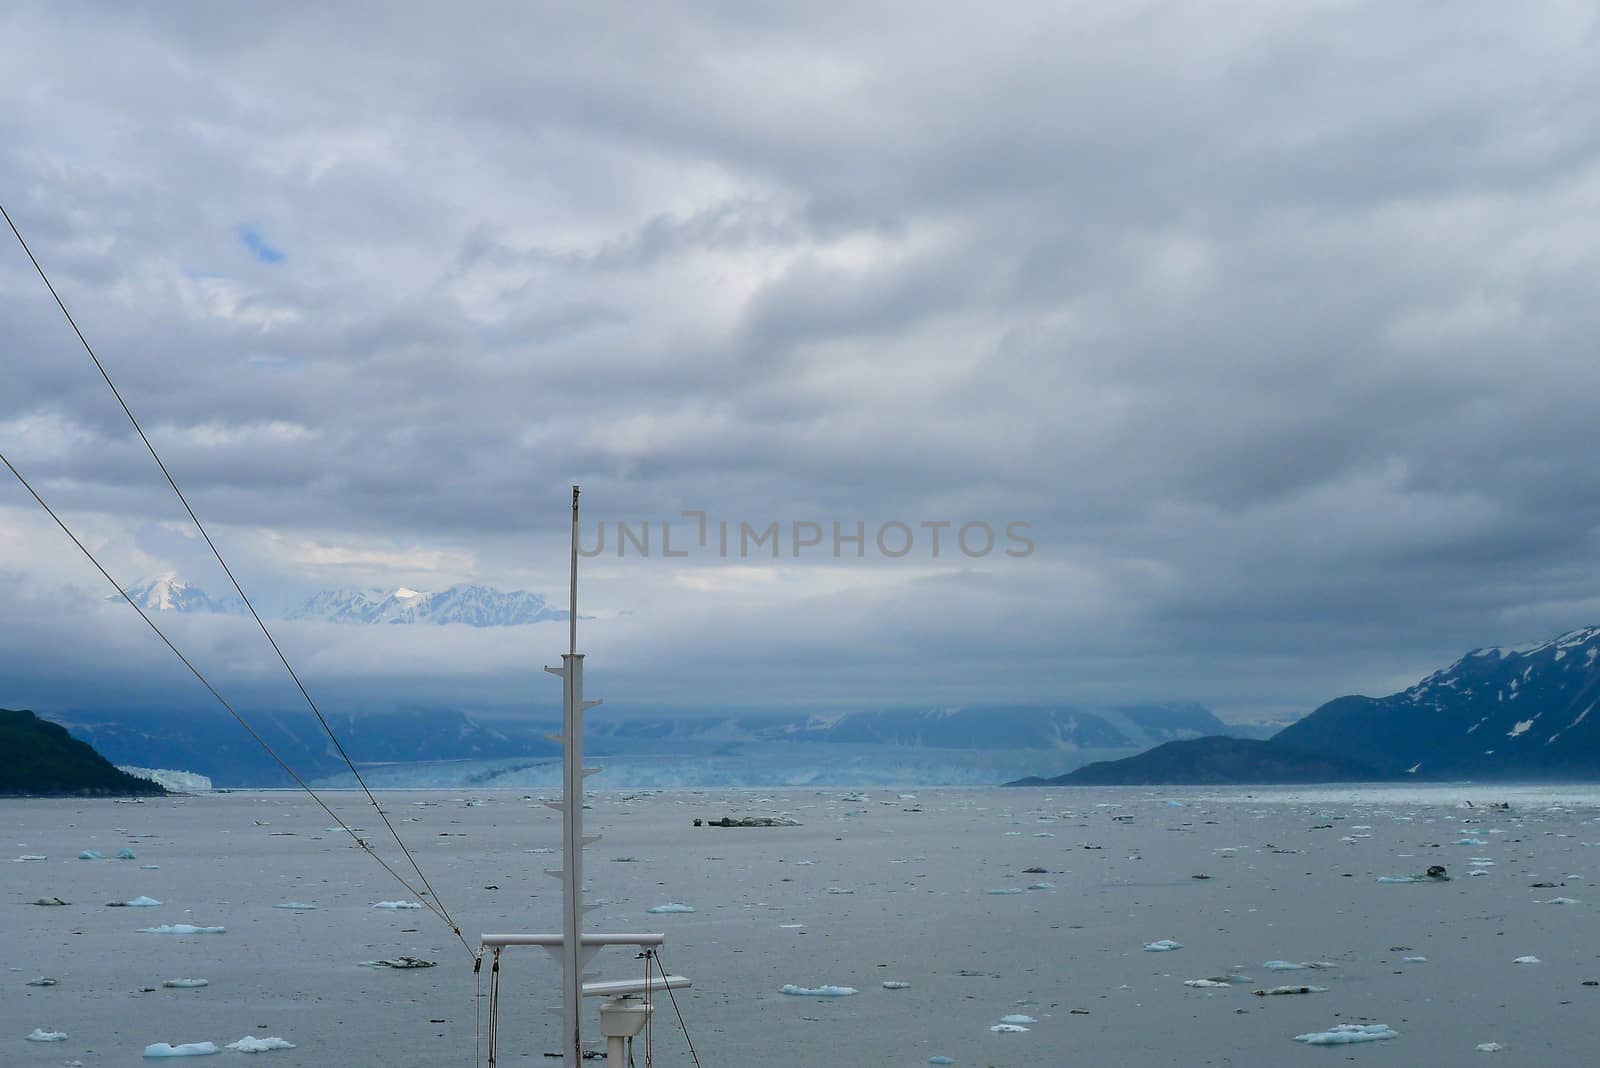 The approach to the Hubbard Glacier in Alaska